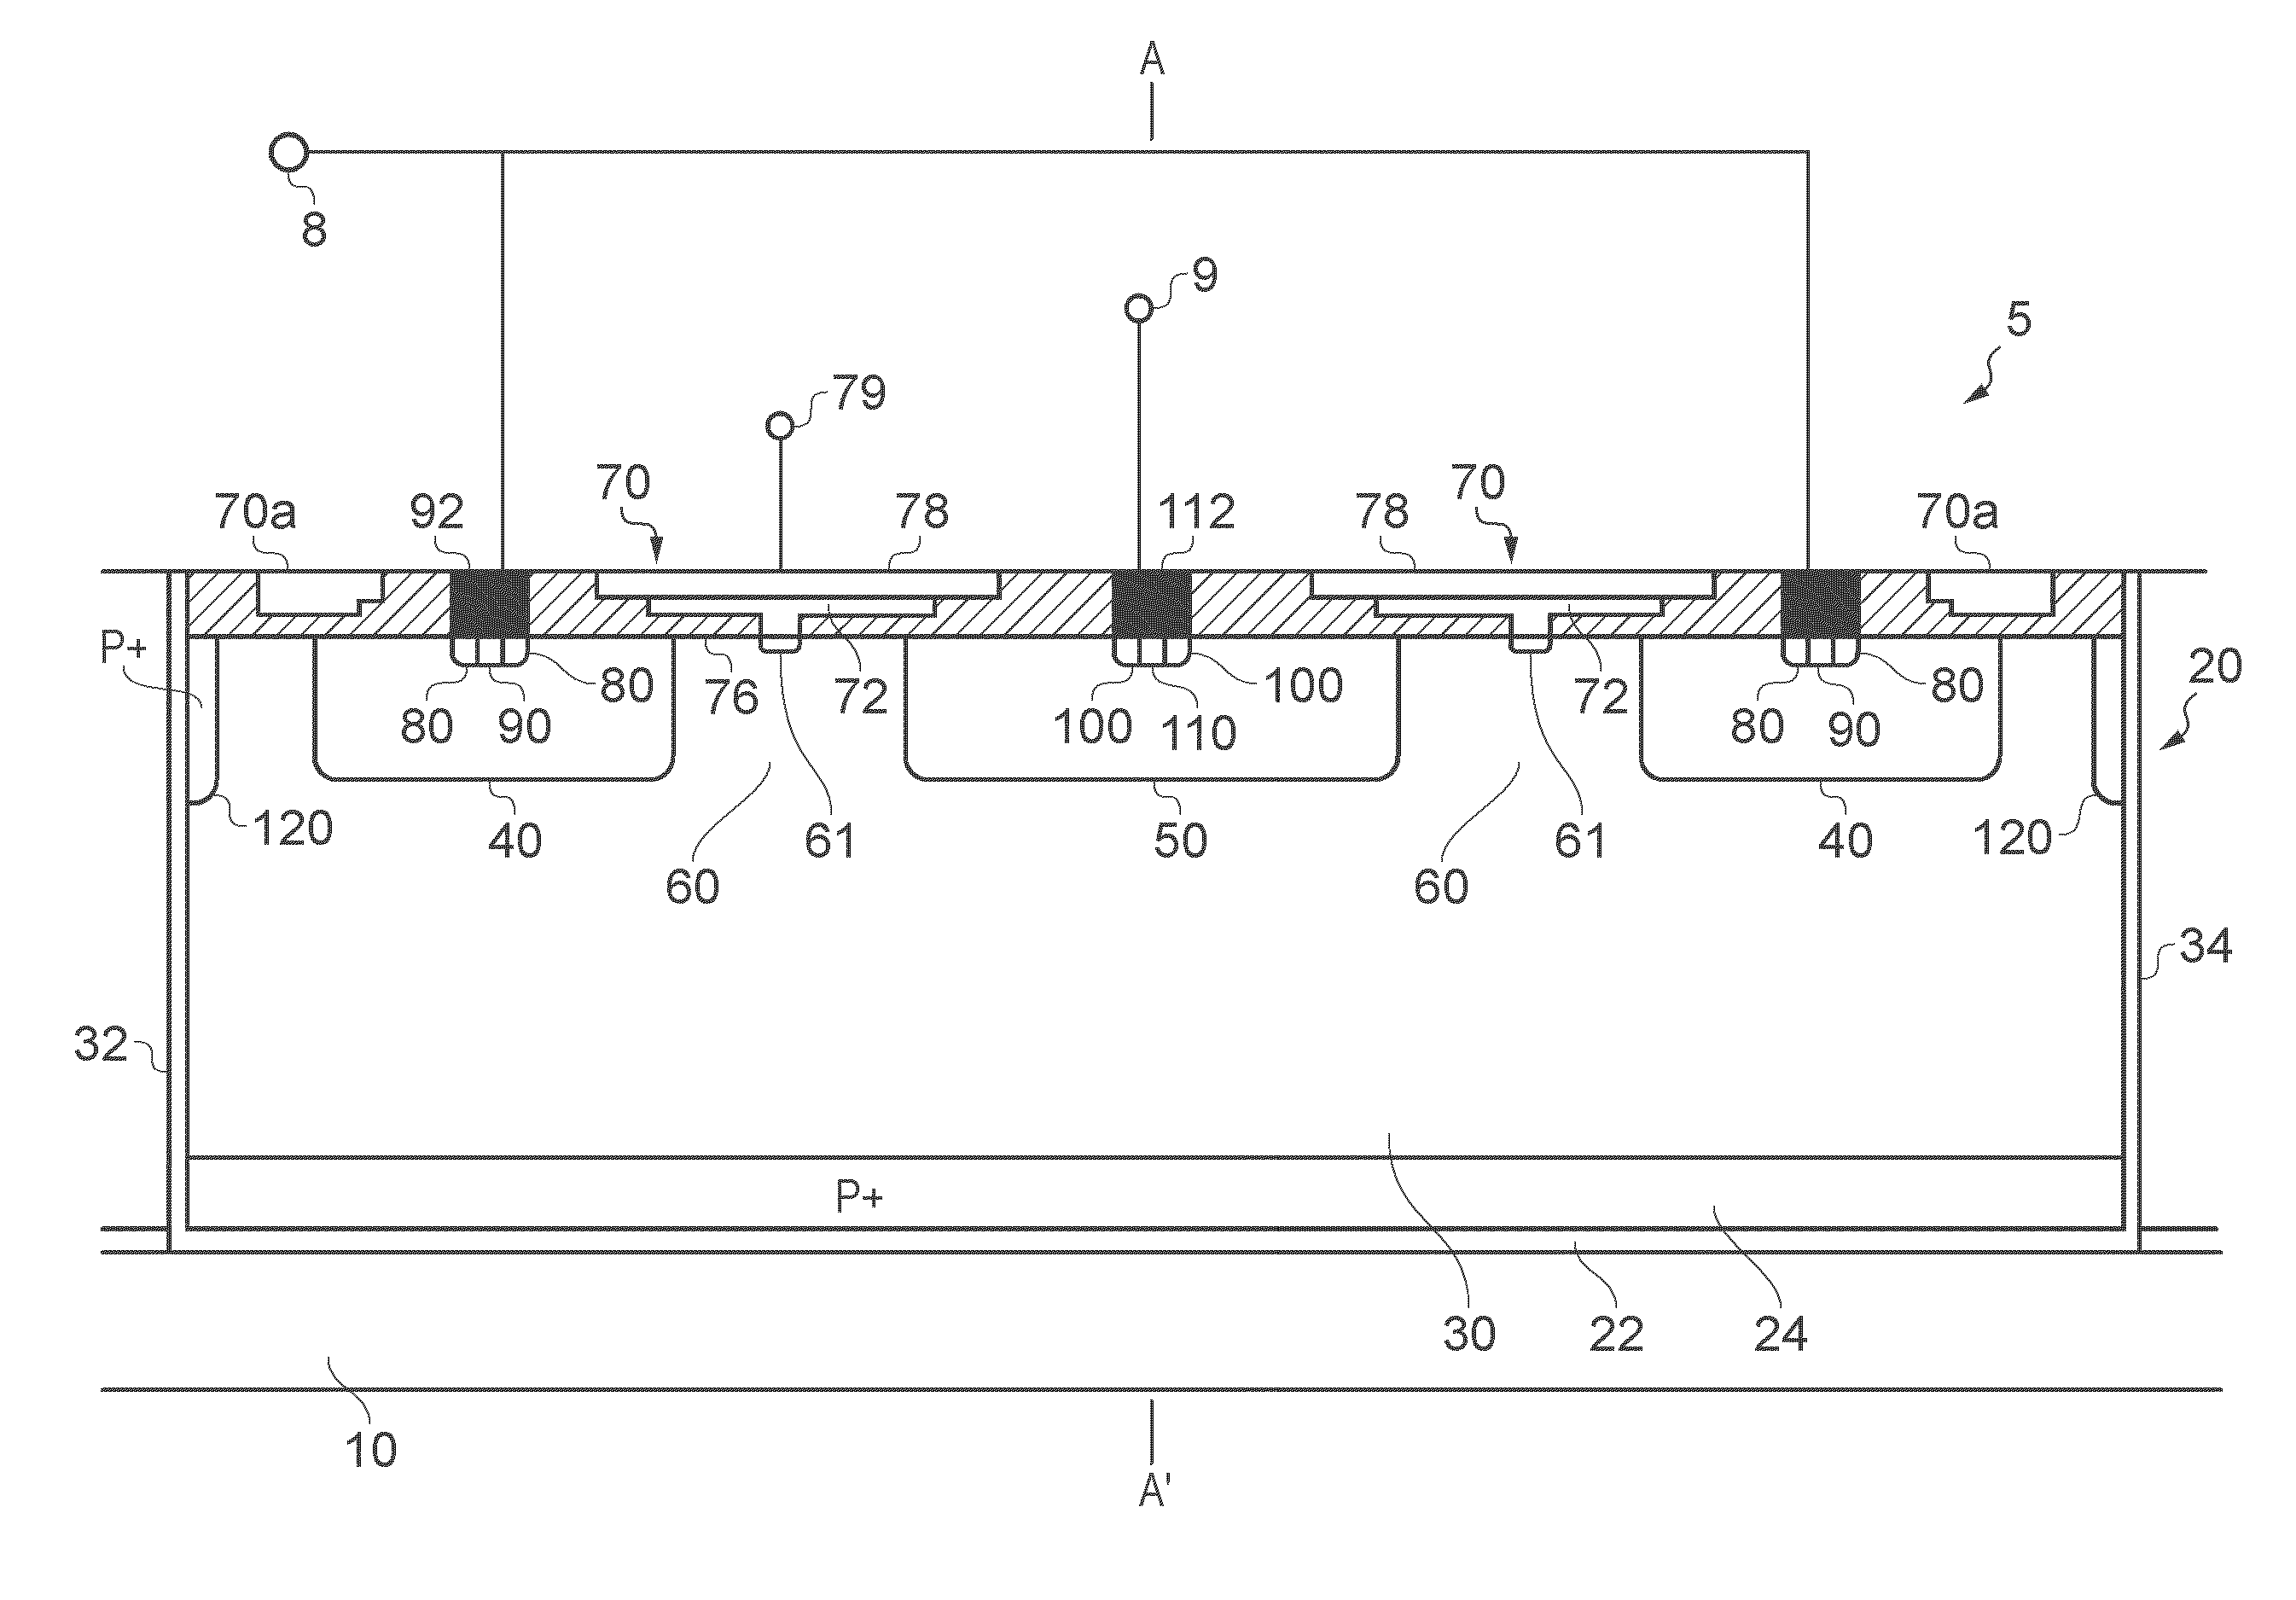 Overvoltage and/or electrostatic discharge protection device